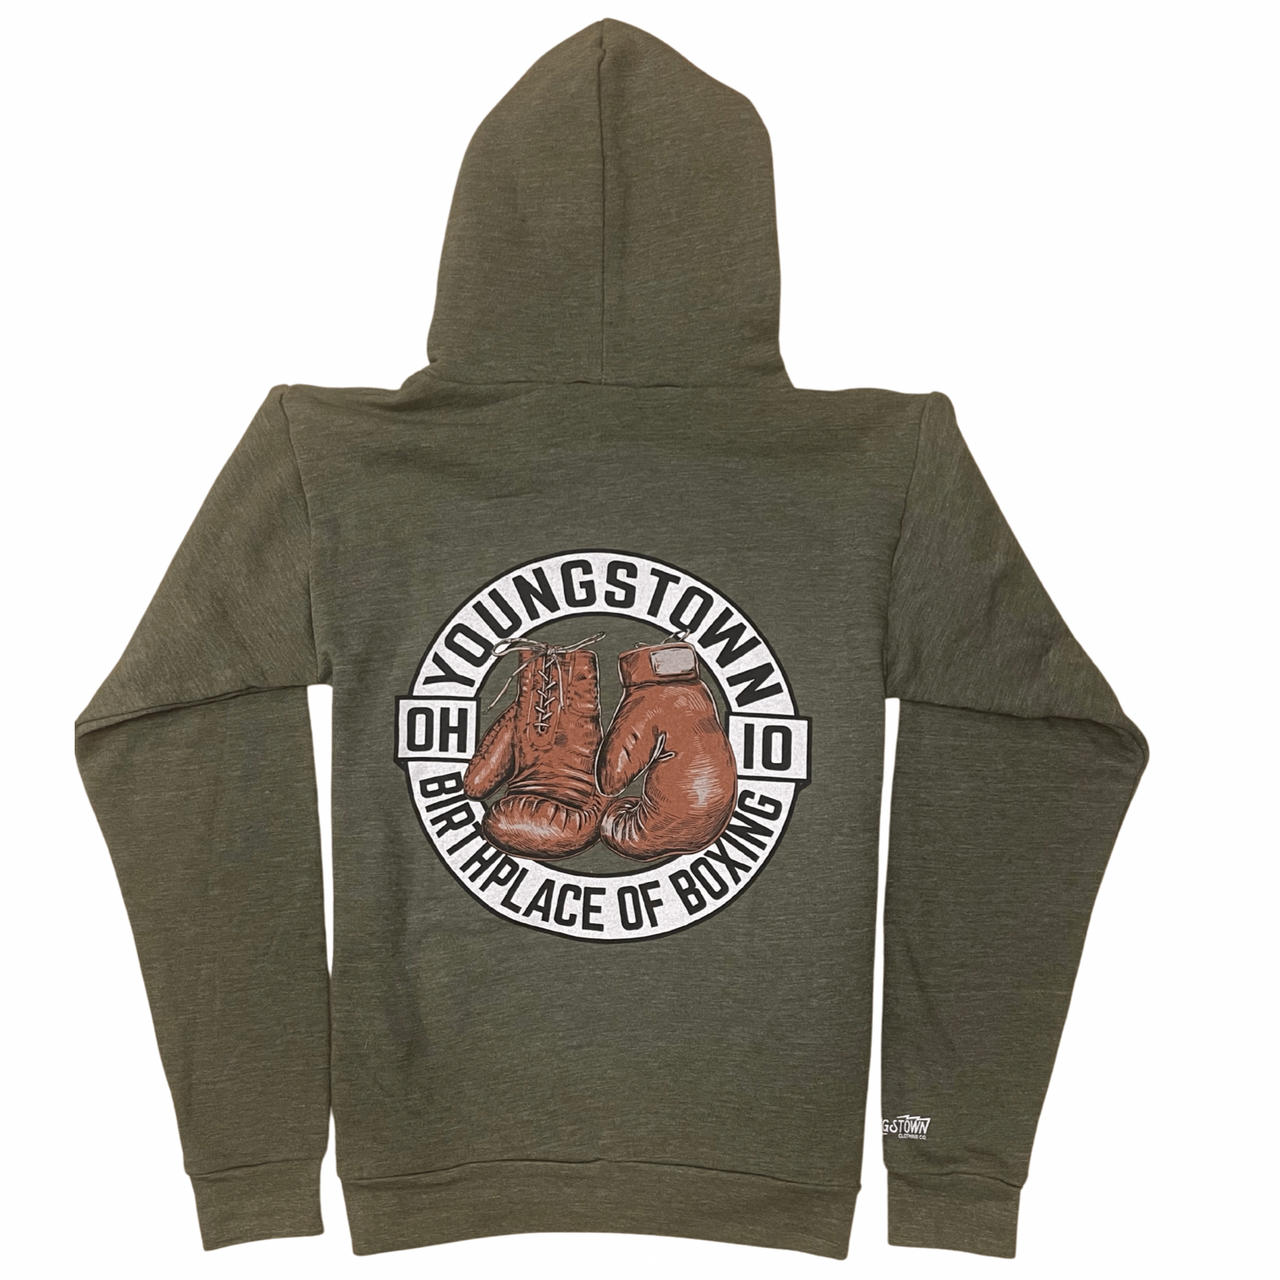 Birthplace of Boxing Hoodie